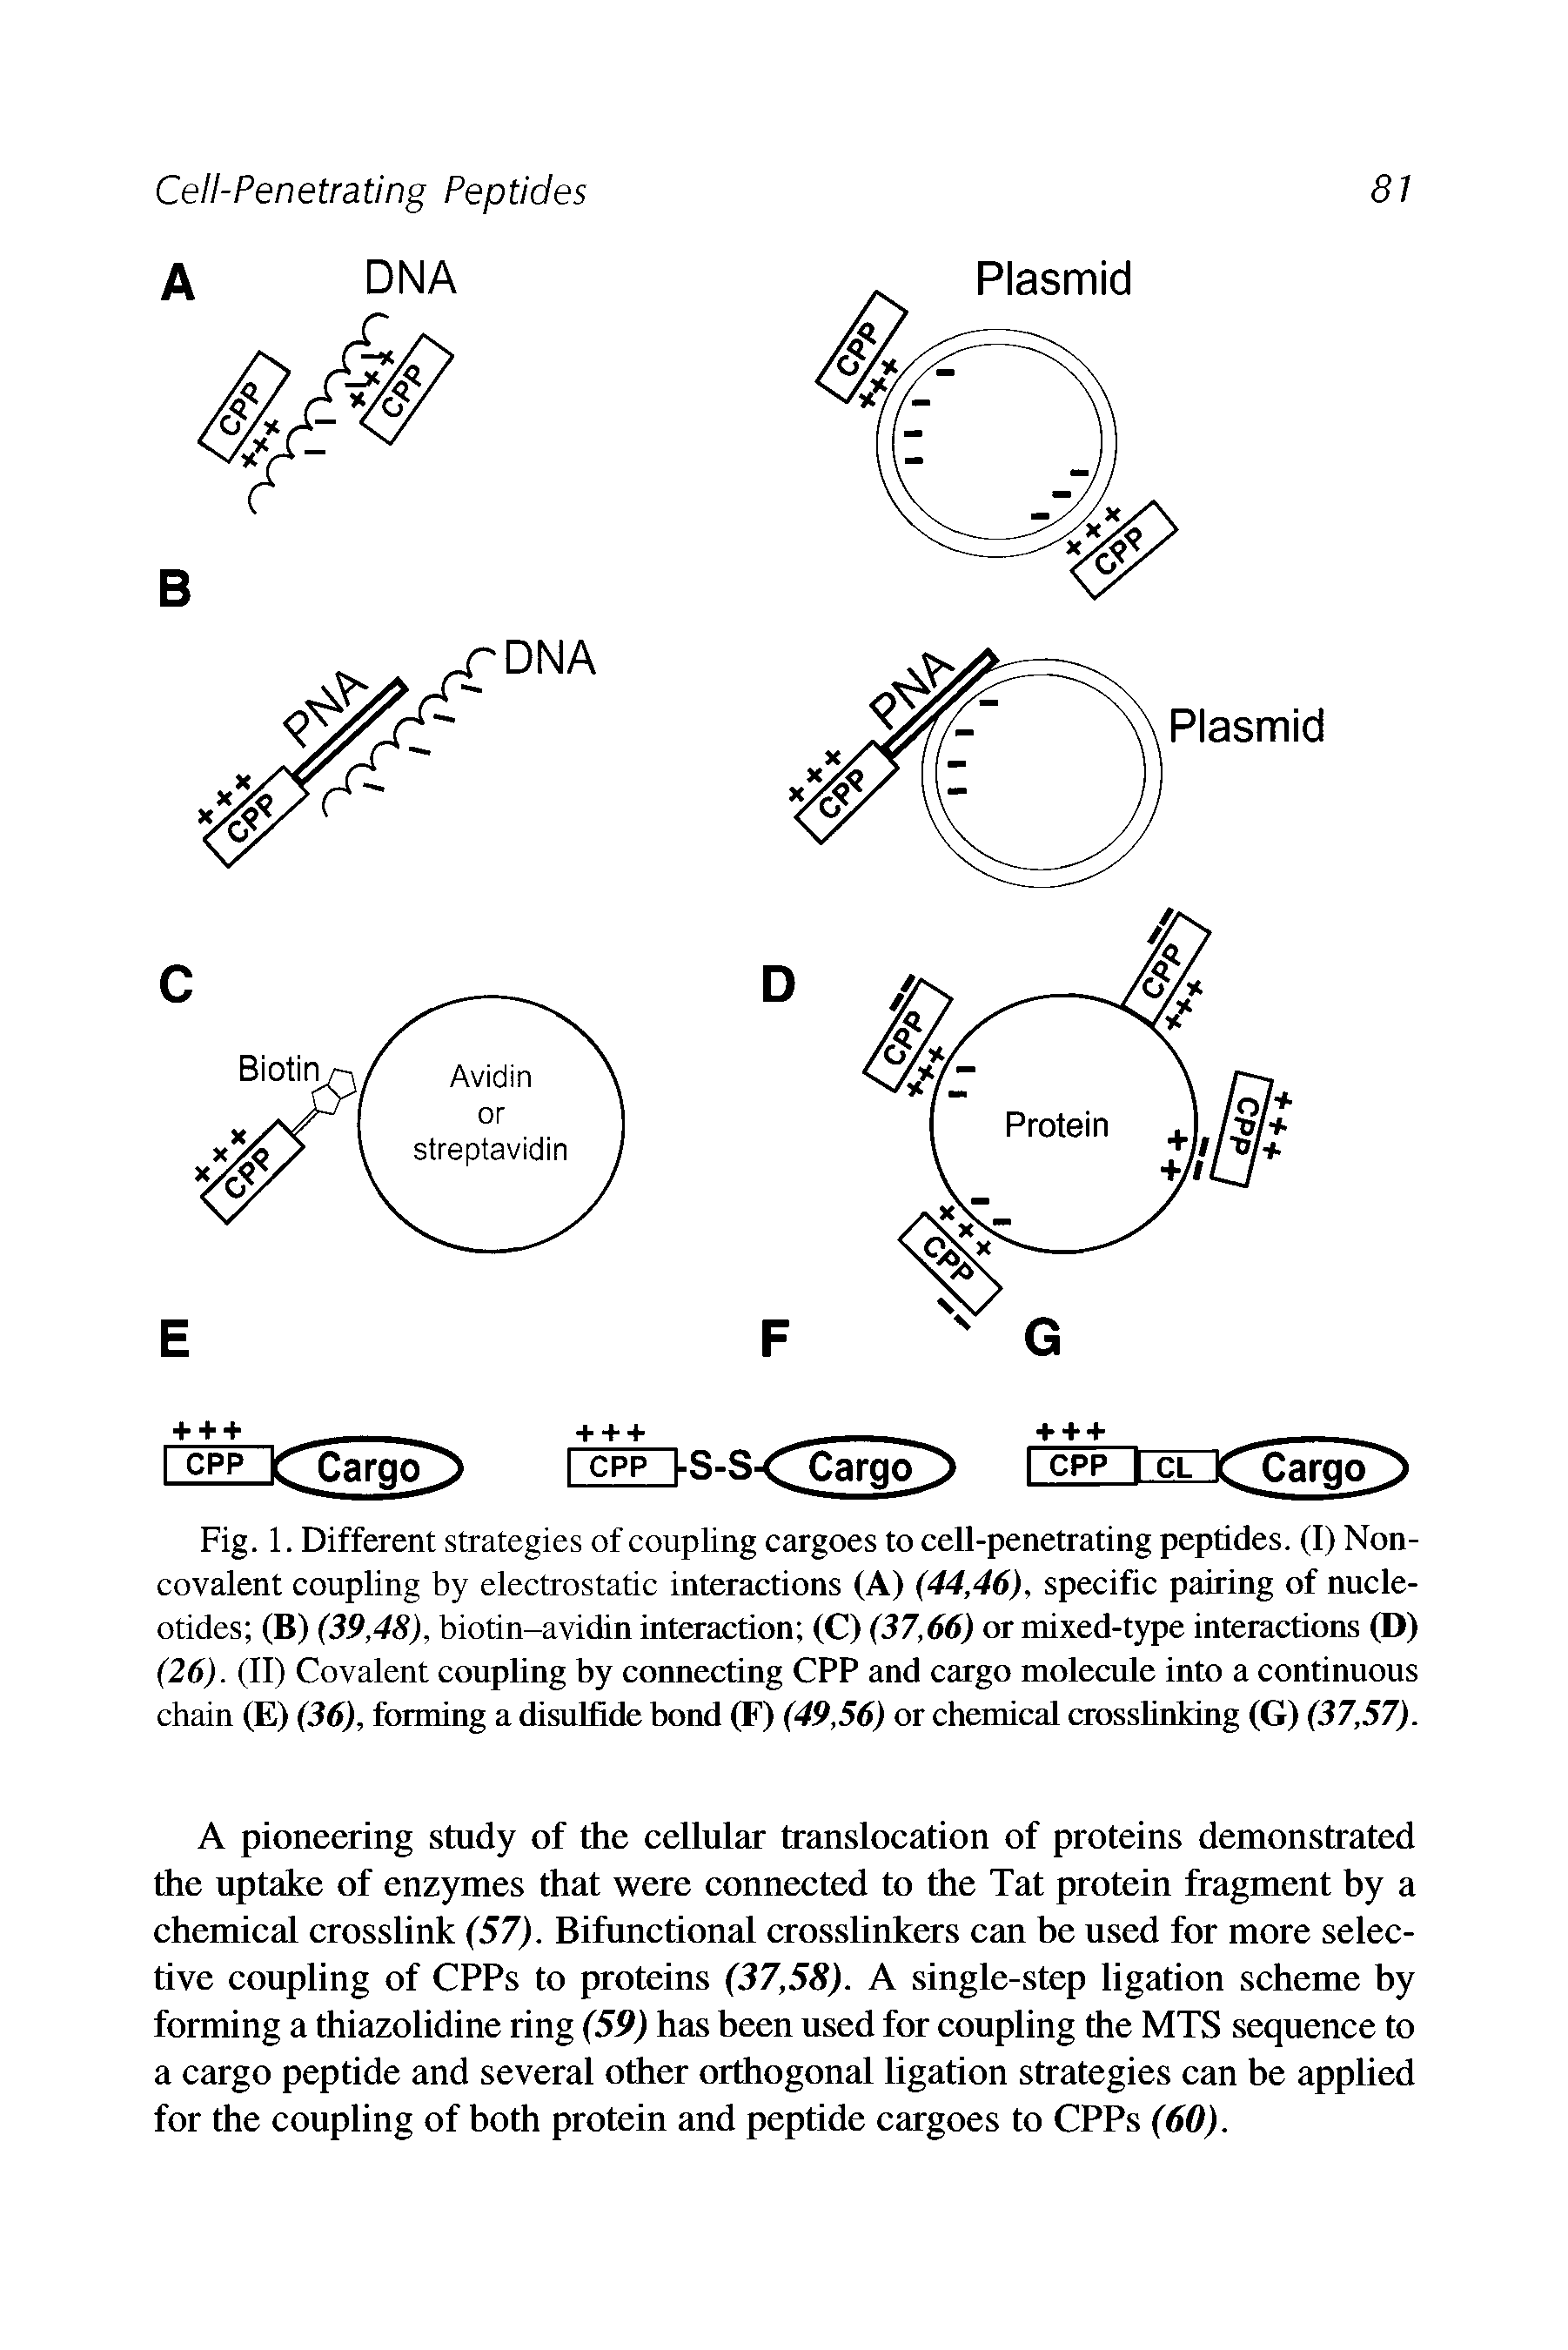 Fig. 1. Different strategies of coupling cargoes to cell-penetrating peptides. (I) Non-covalent coupling by electrostatic interactions (A) (44,46), specific pairing of nucleotides (B) (39,48), biotin-avidin interaction (C) (37,66) or mixed-type interactions (D) (26). (II) Covalent coupling by connecting CPP and cargo molecule into a continuous chain (E) (36), forming a disulfide bond (F) (49,56) or chemical crosslinking (G) (37,57).